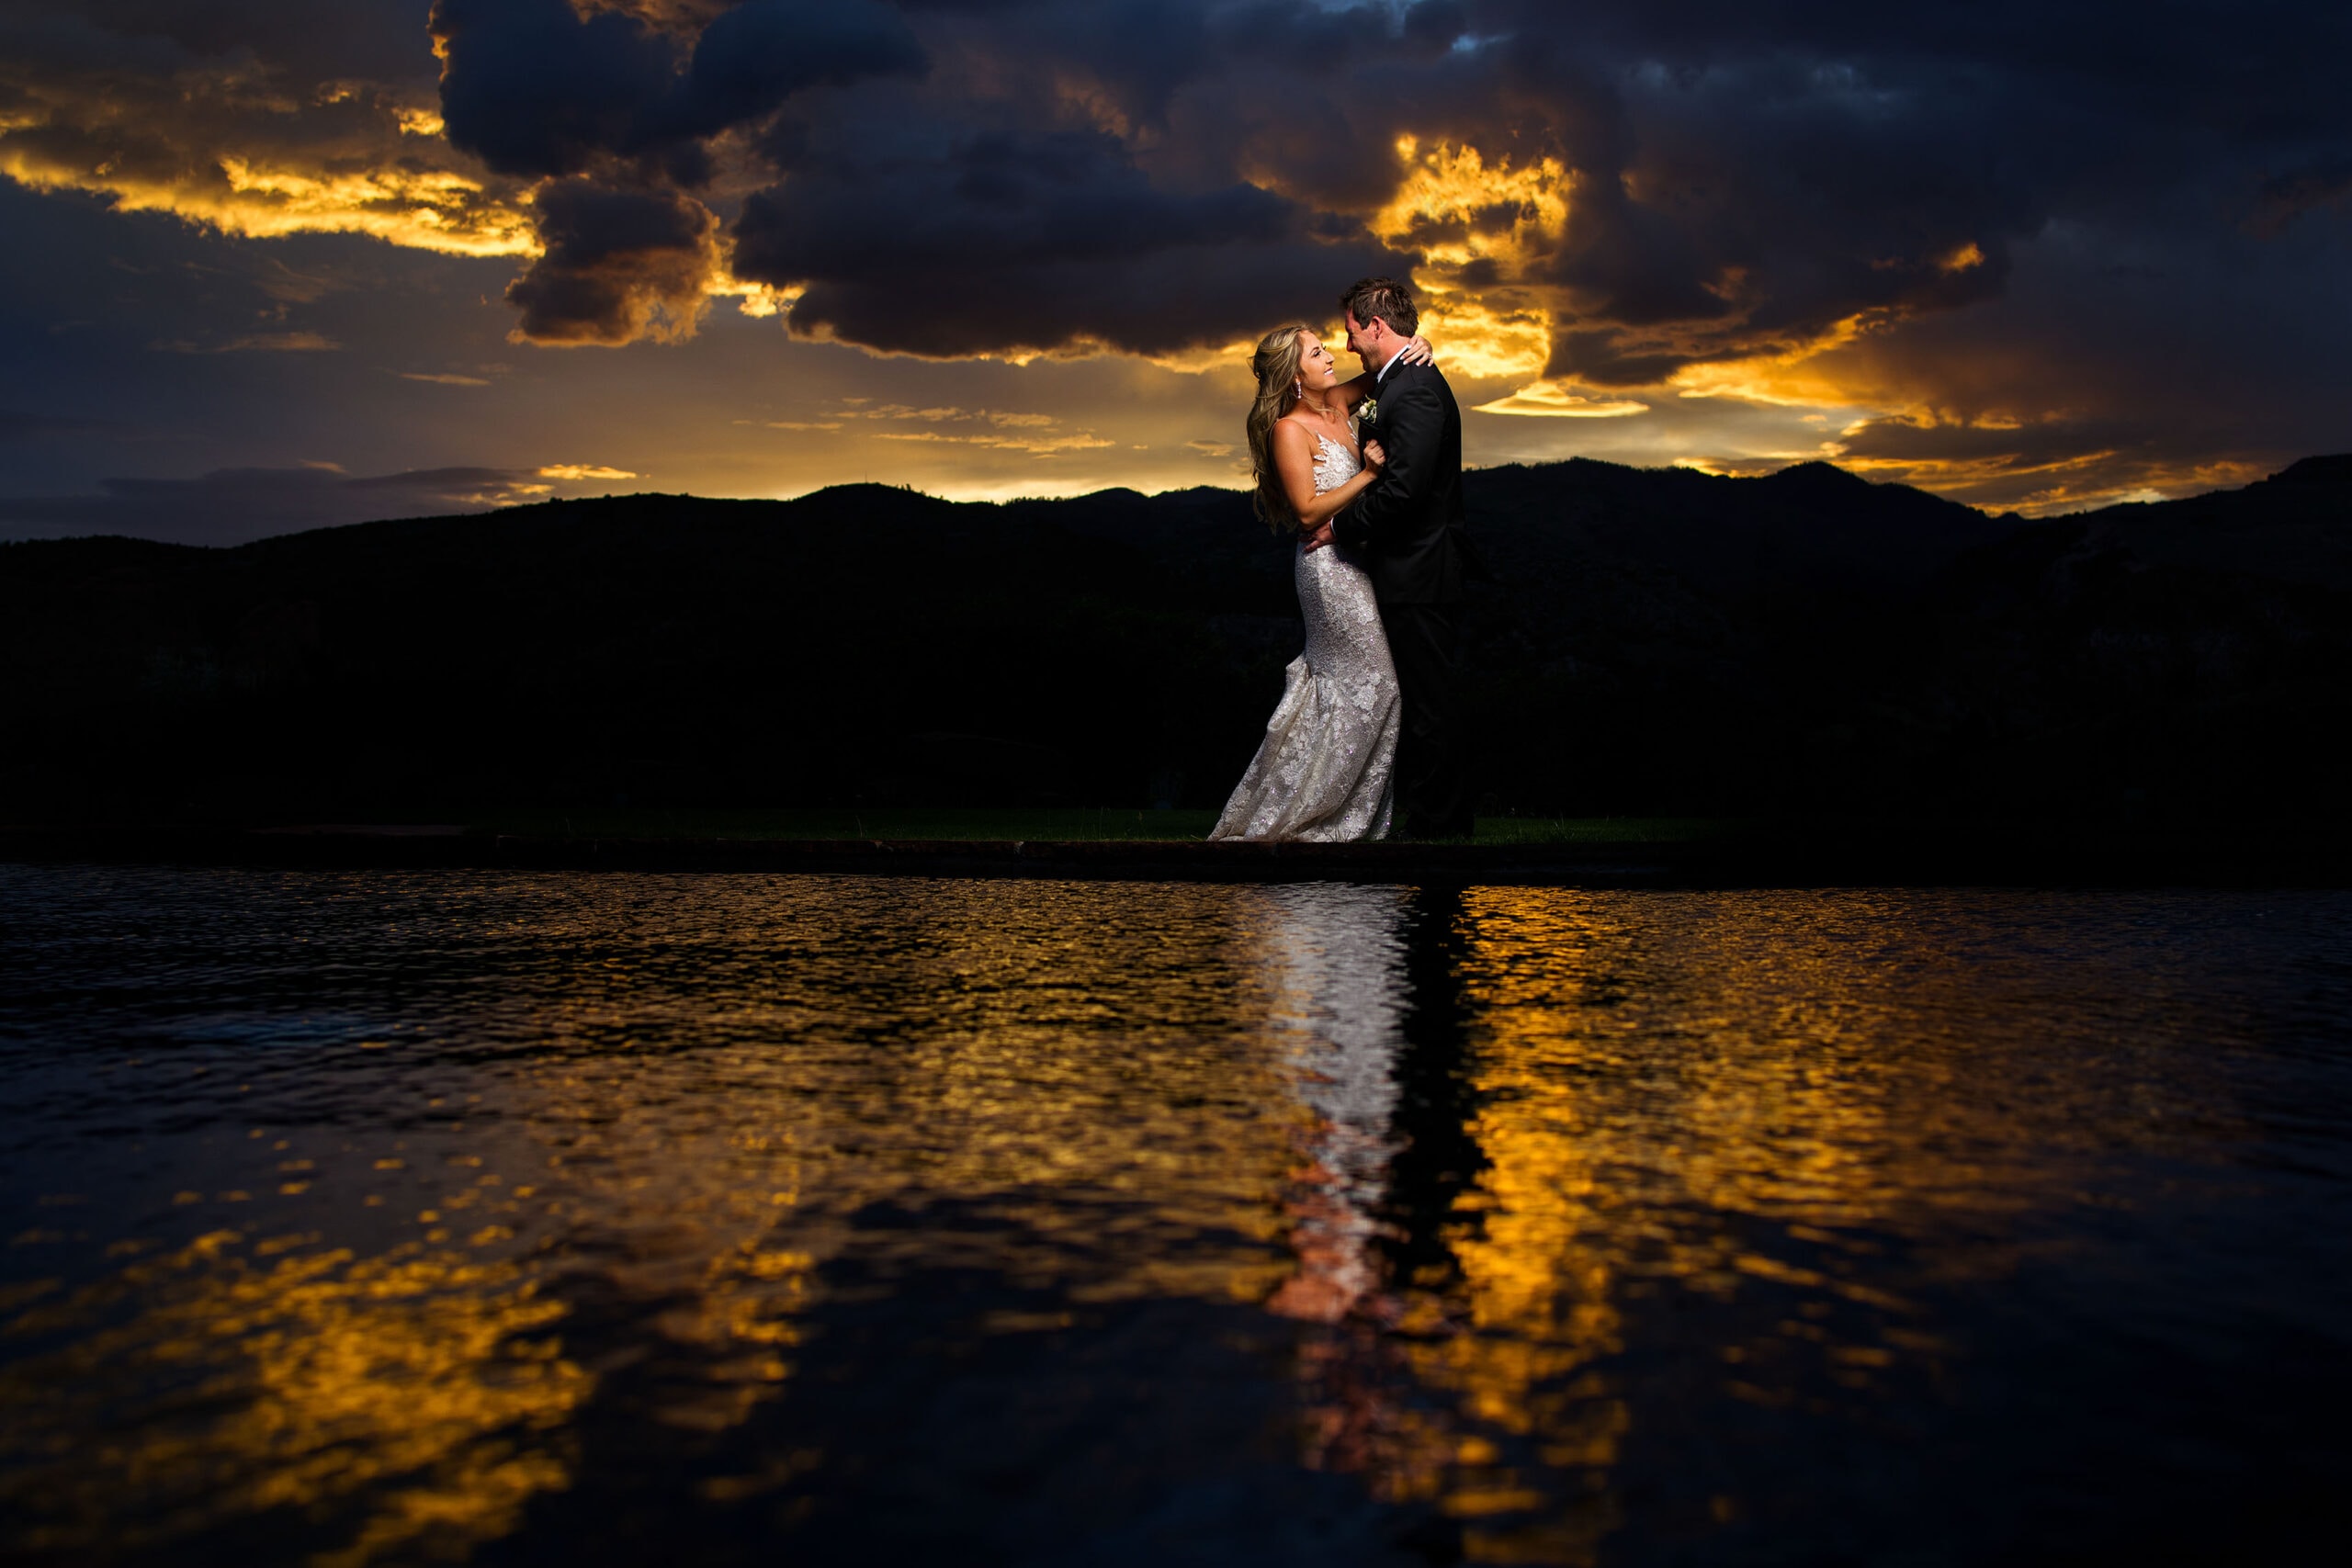 The newlyweds pose for a photo near the reflection pool as the the sun sets behind the mountains at Garden of the Gods Resort